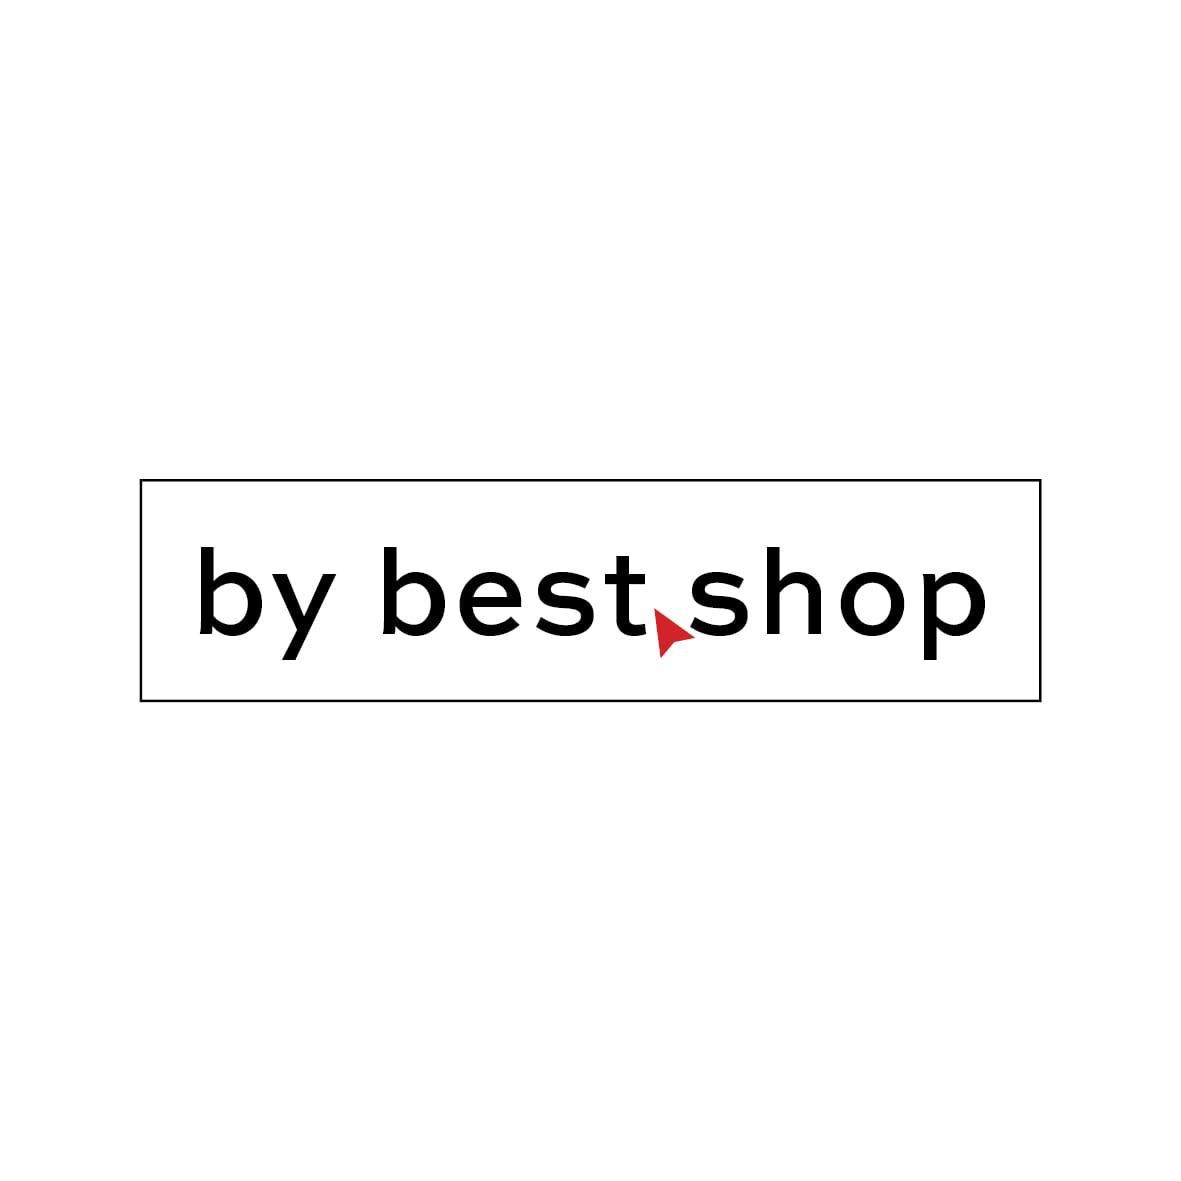 By Best Shop - Simplicity and ease of online shopping